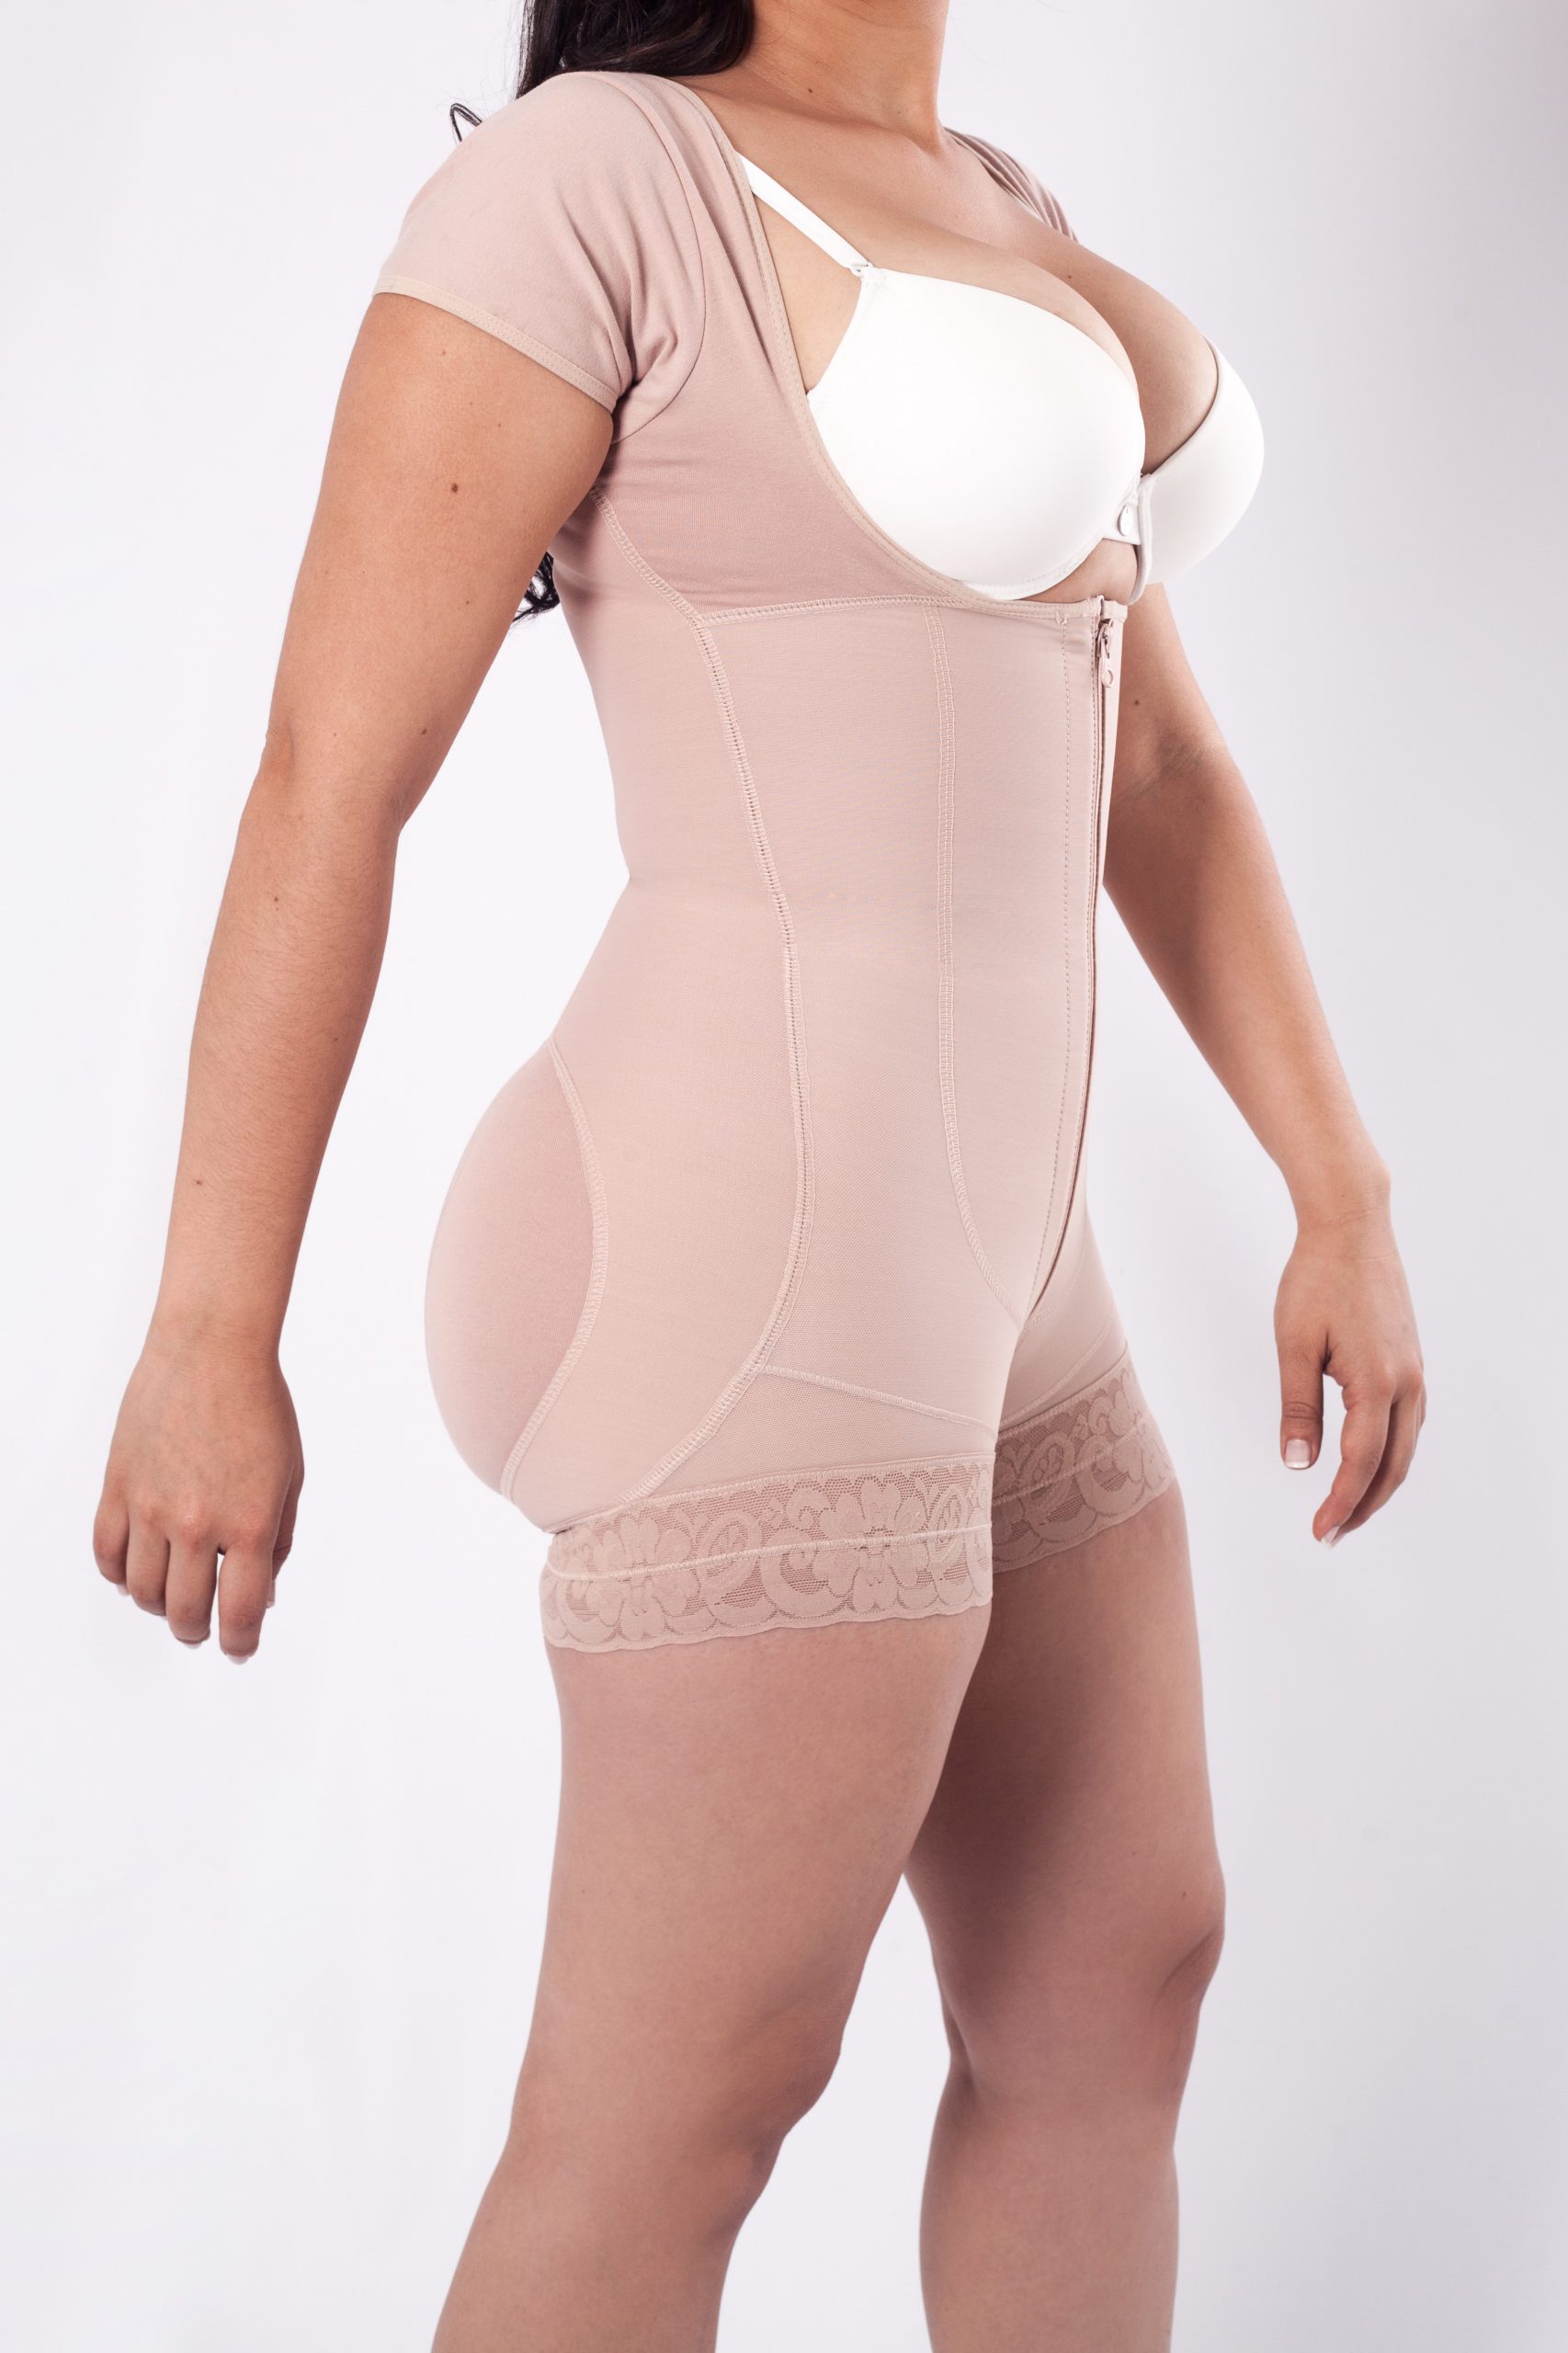 Your Contour Mid-Thigh Arm Slimmer Body Shapewear - All in One Shaping Body  Briefer with Short sleeve Arm shaper